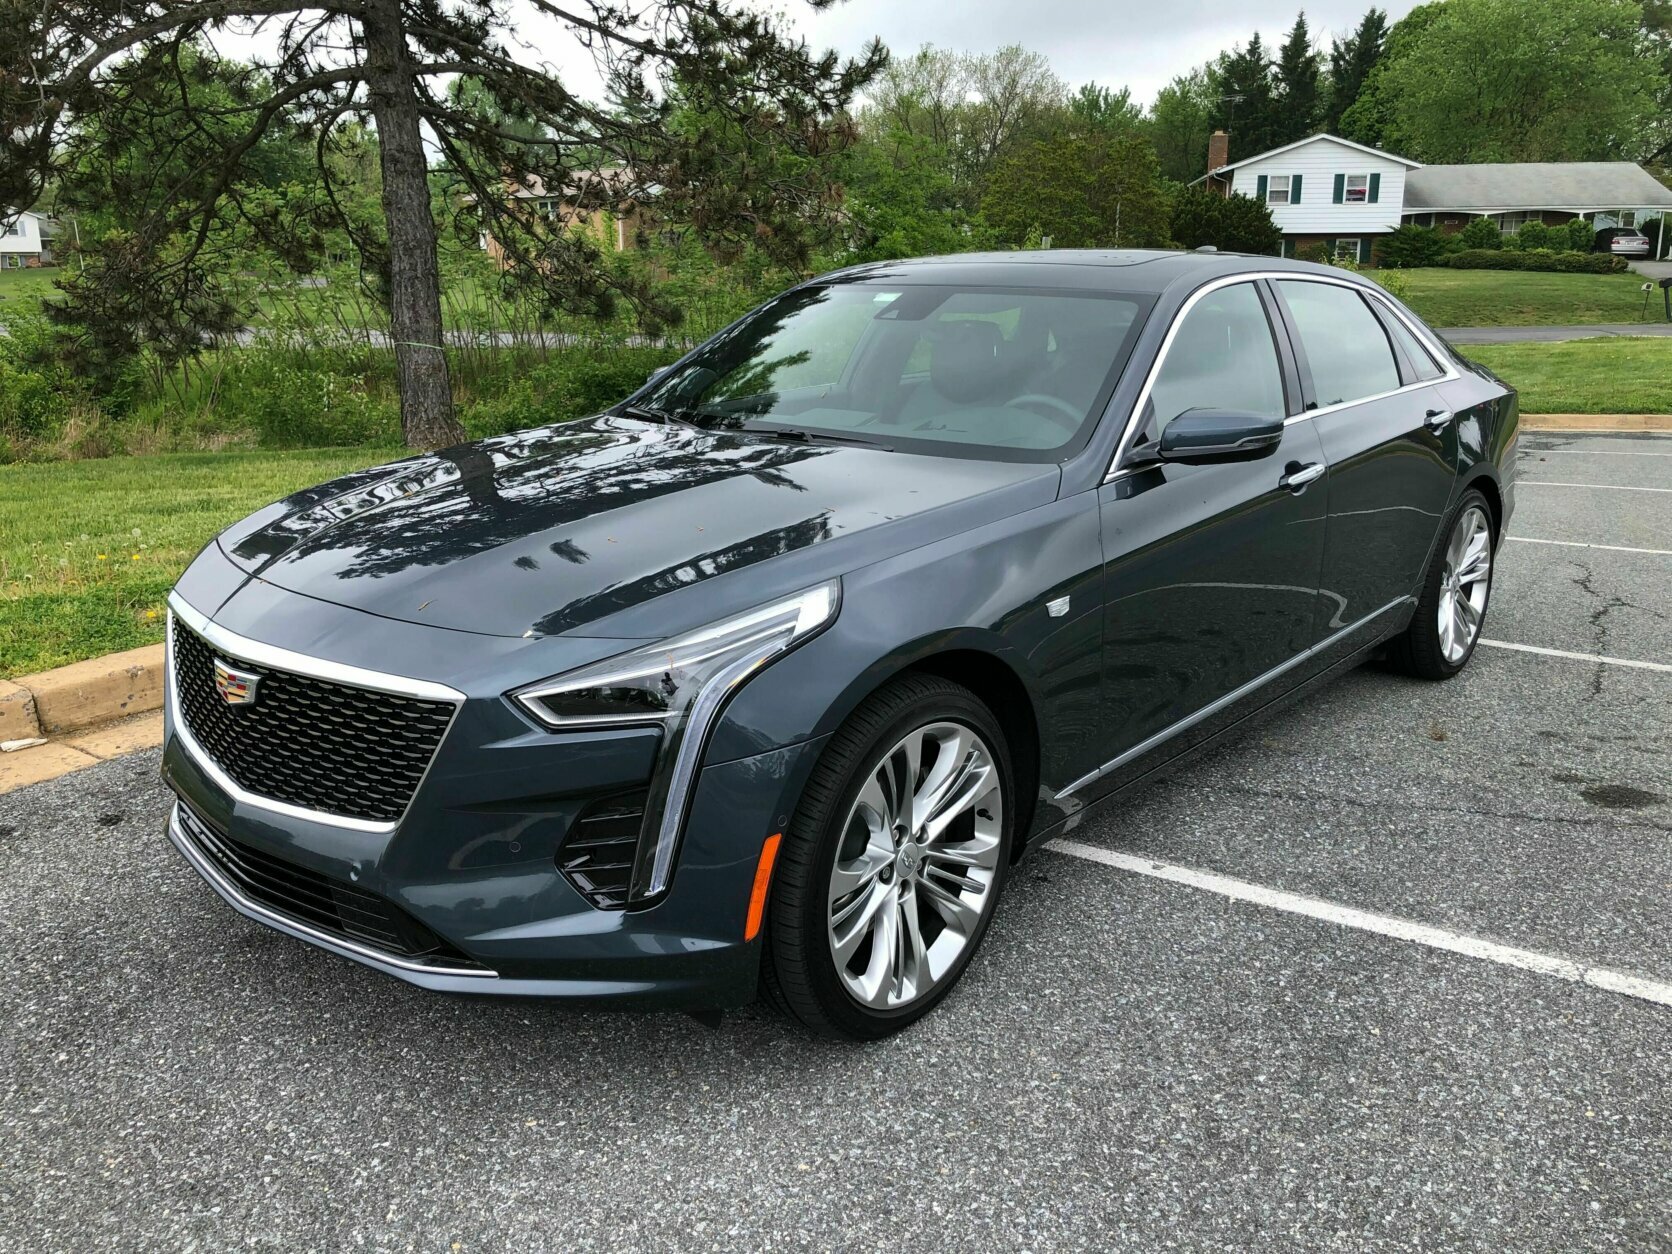 <p>Those long drives can get fatiguing, which is why the Cadillac CT6 we drove is such an appealing summer road trip companion.</p>
<p>Cadillac’s Super Cruise system will let you drive hands-off on certain highways.</p>
<p>That’s in addition to luxury touches to keep you comfortable, such as heated and ventilated front and rear seats. Cadillac also says the front seats feature 15 massage settings.</p>
